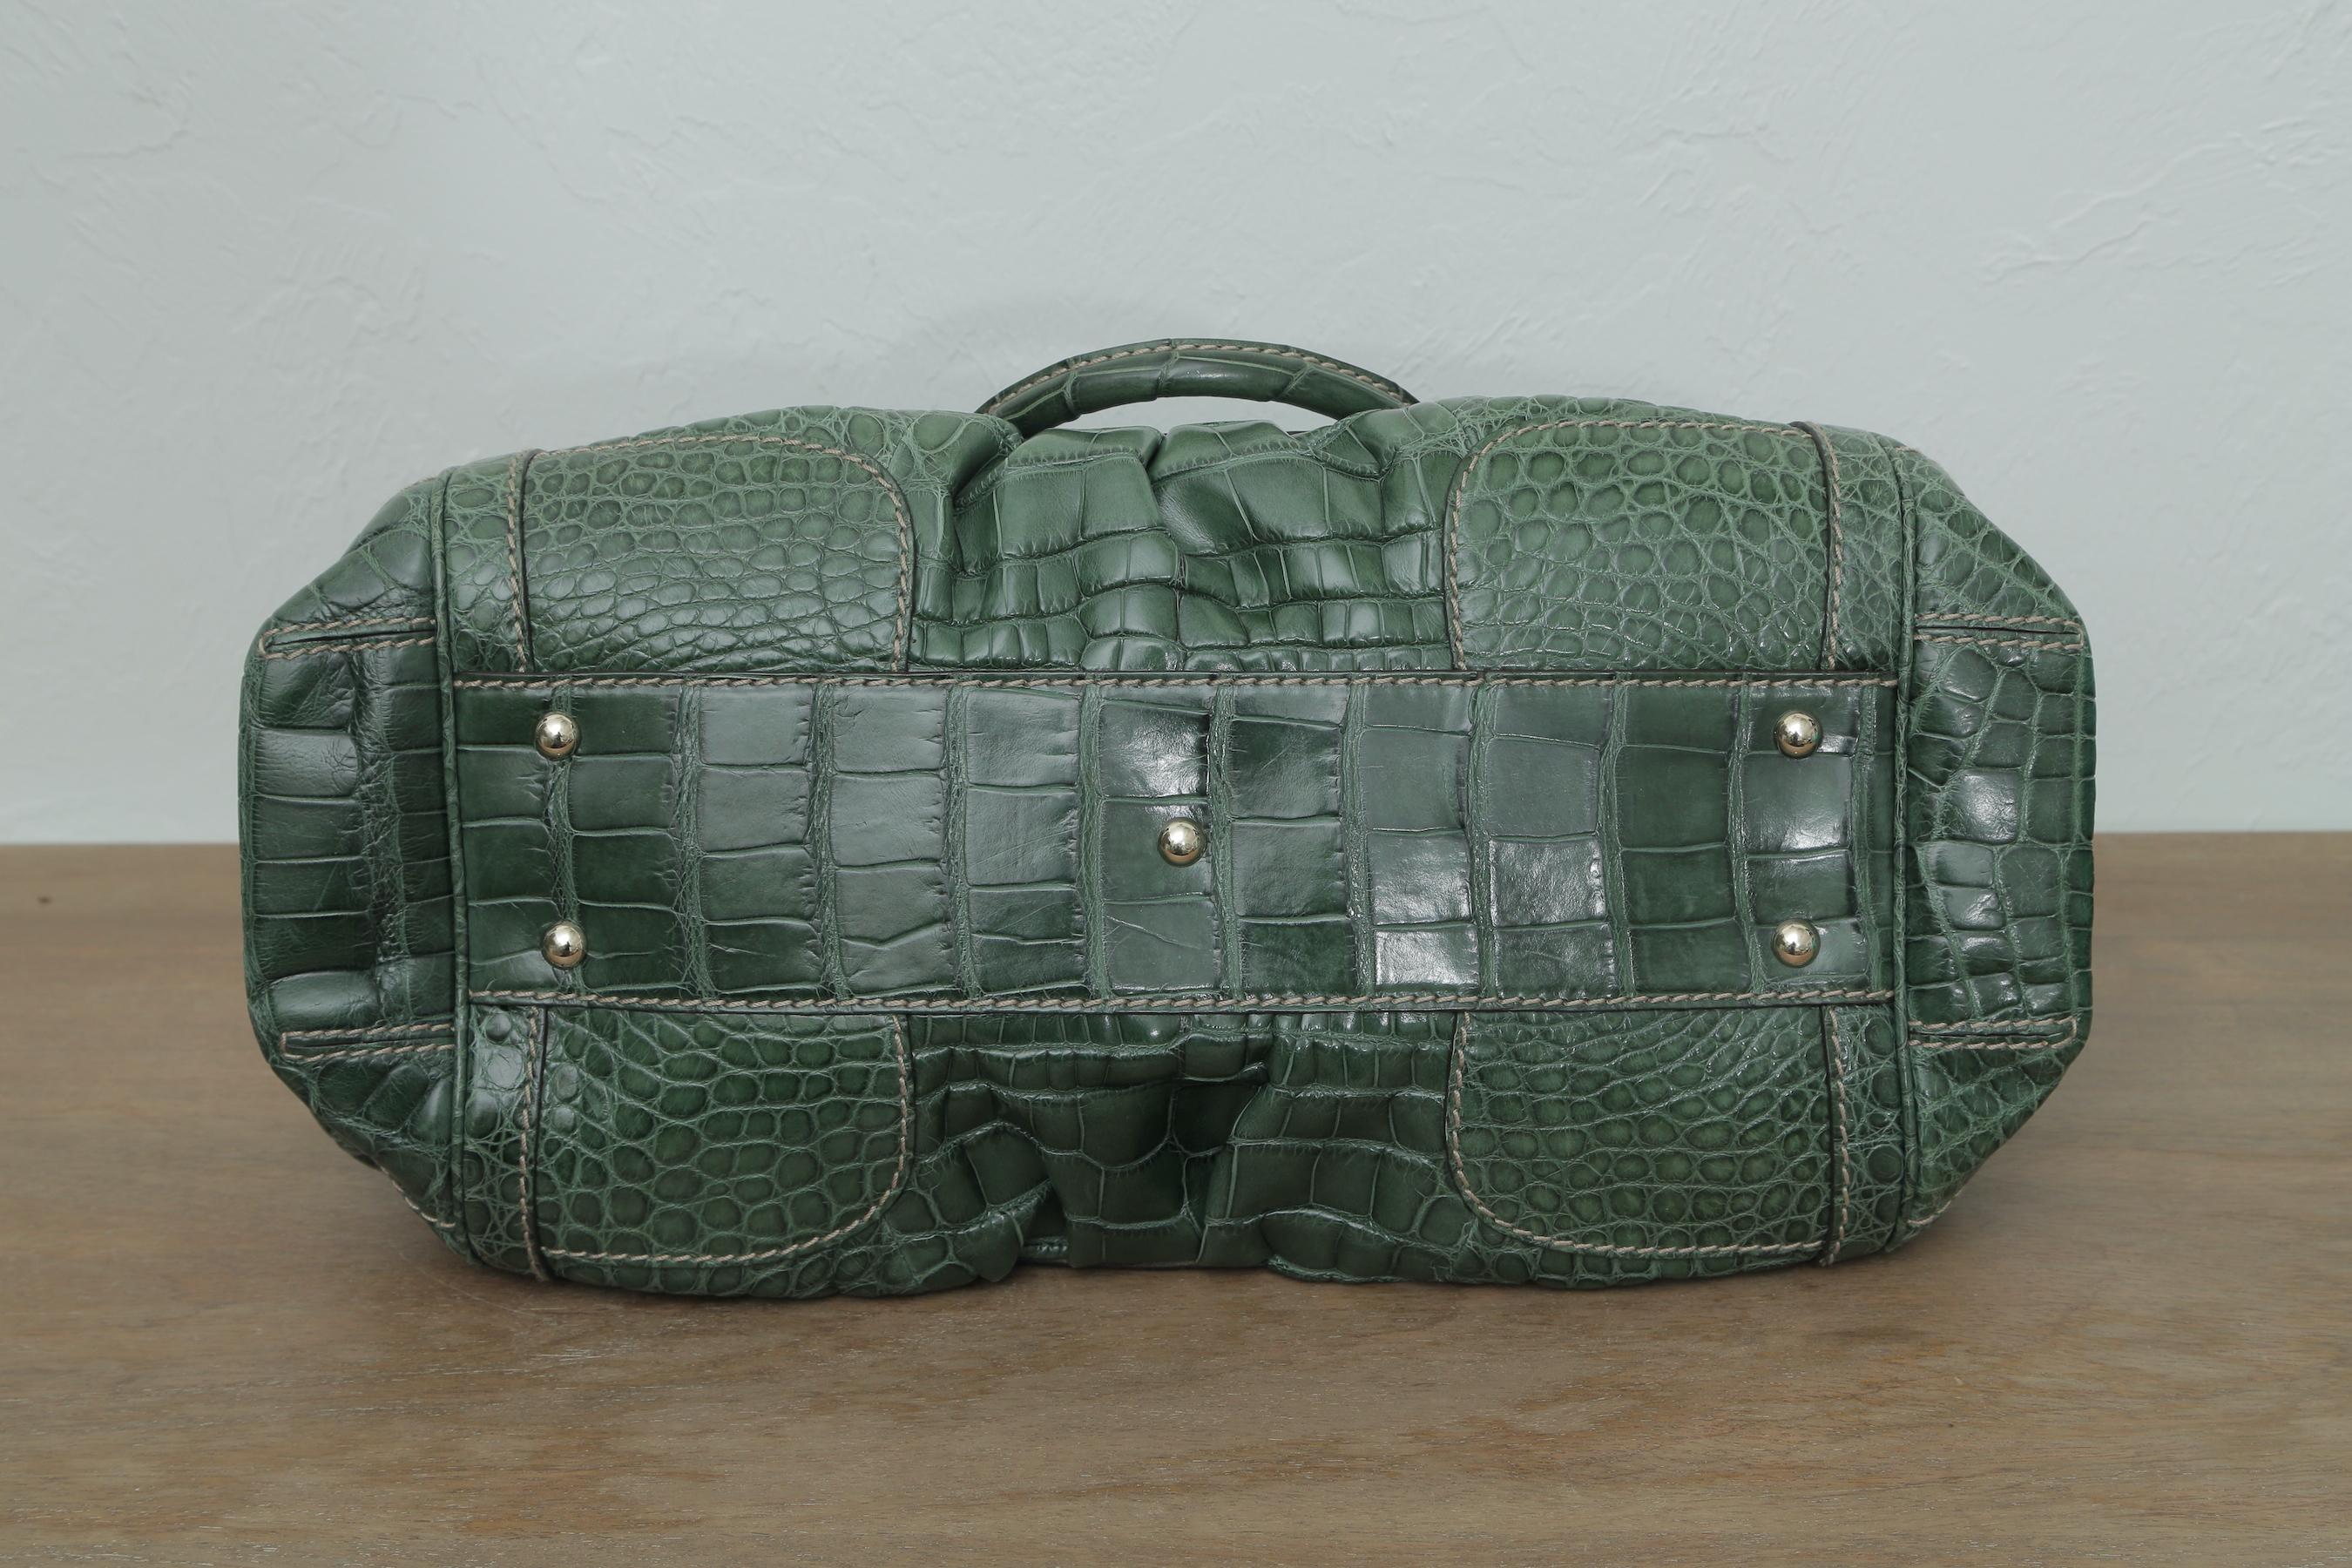  Rare Gucci Limited Edition Green Crocodile Skin Leather Weekend/Travel Bag For Sale 1